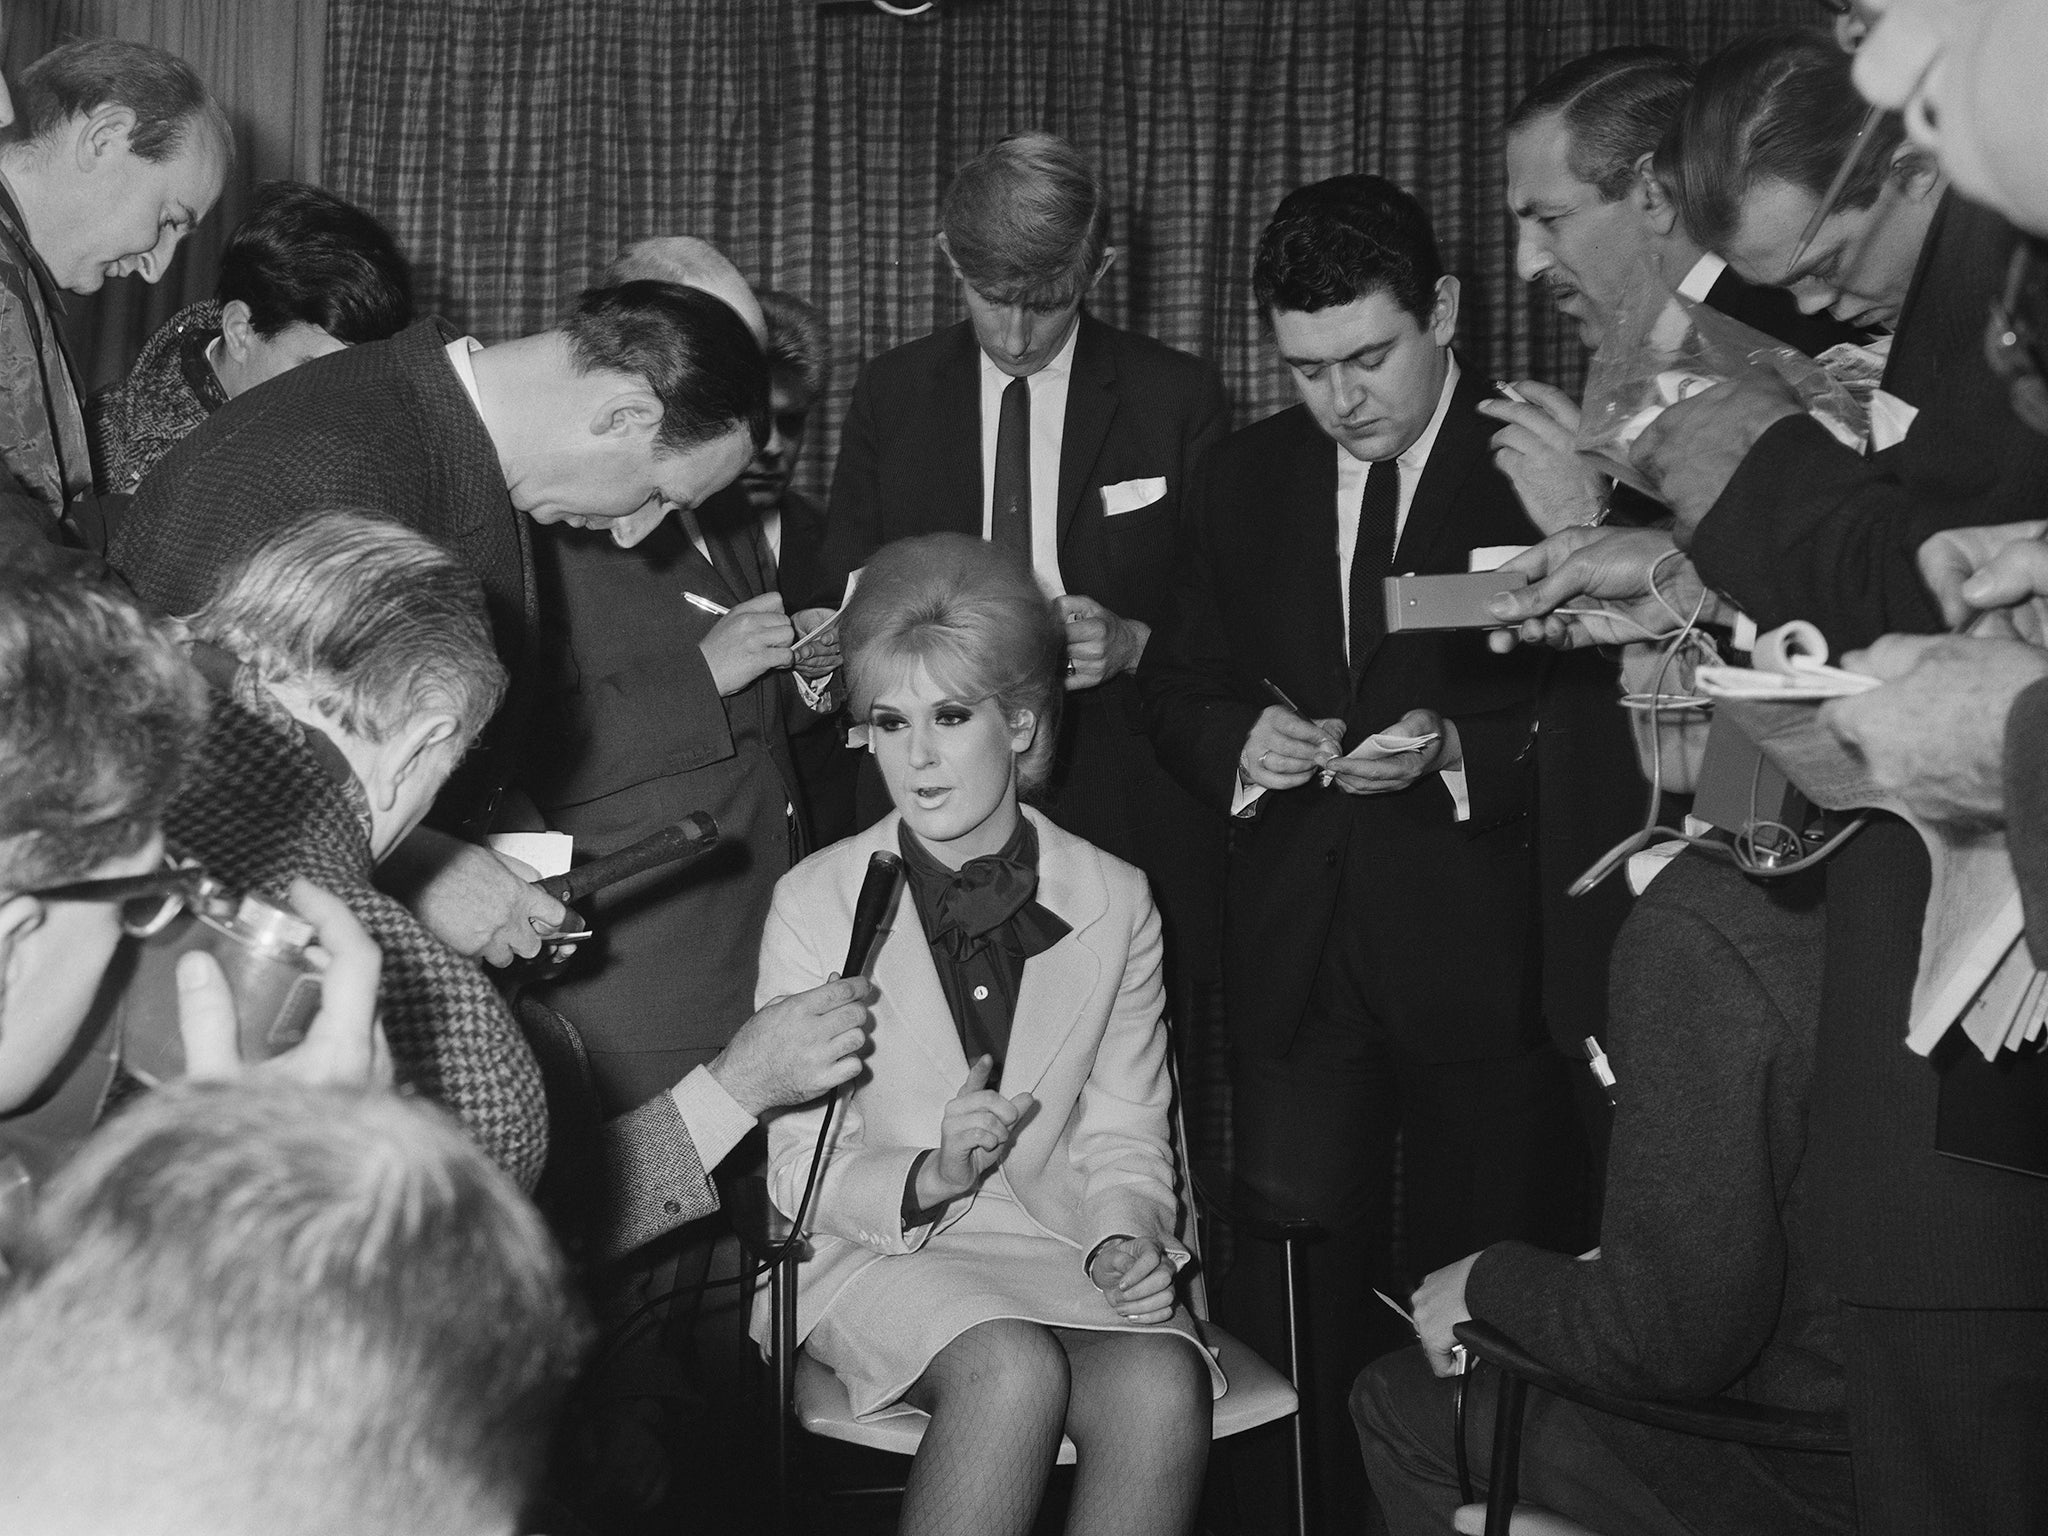 Speaking to the press in 1964